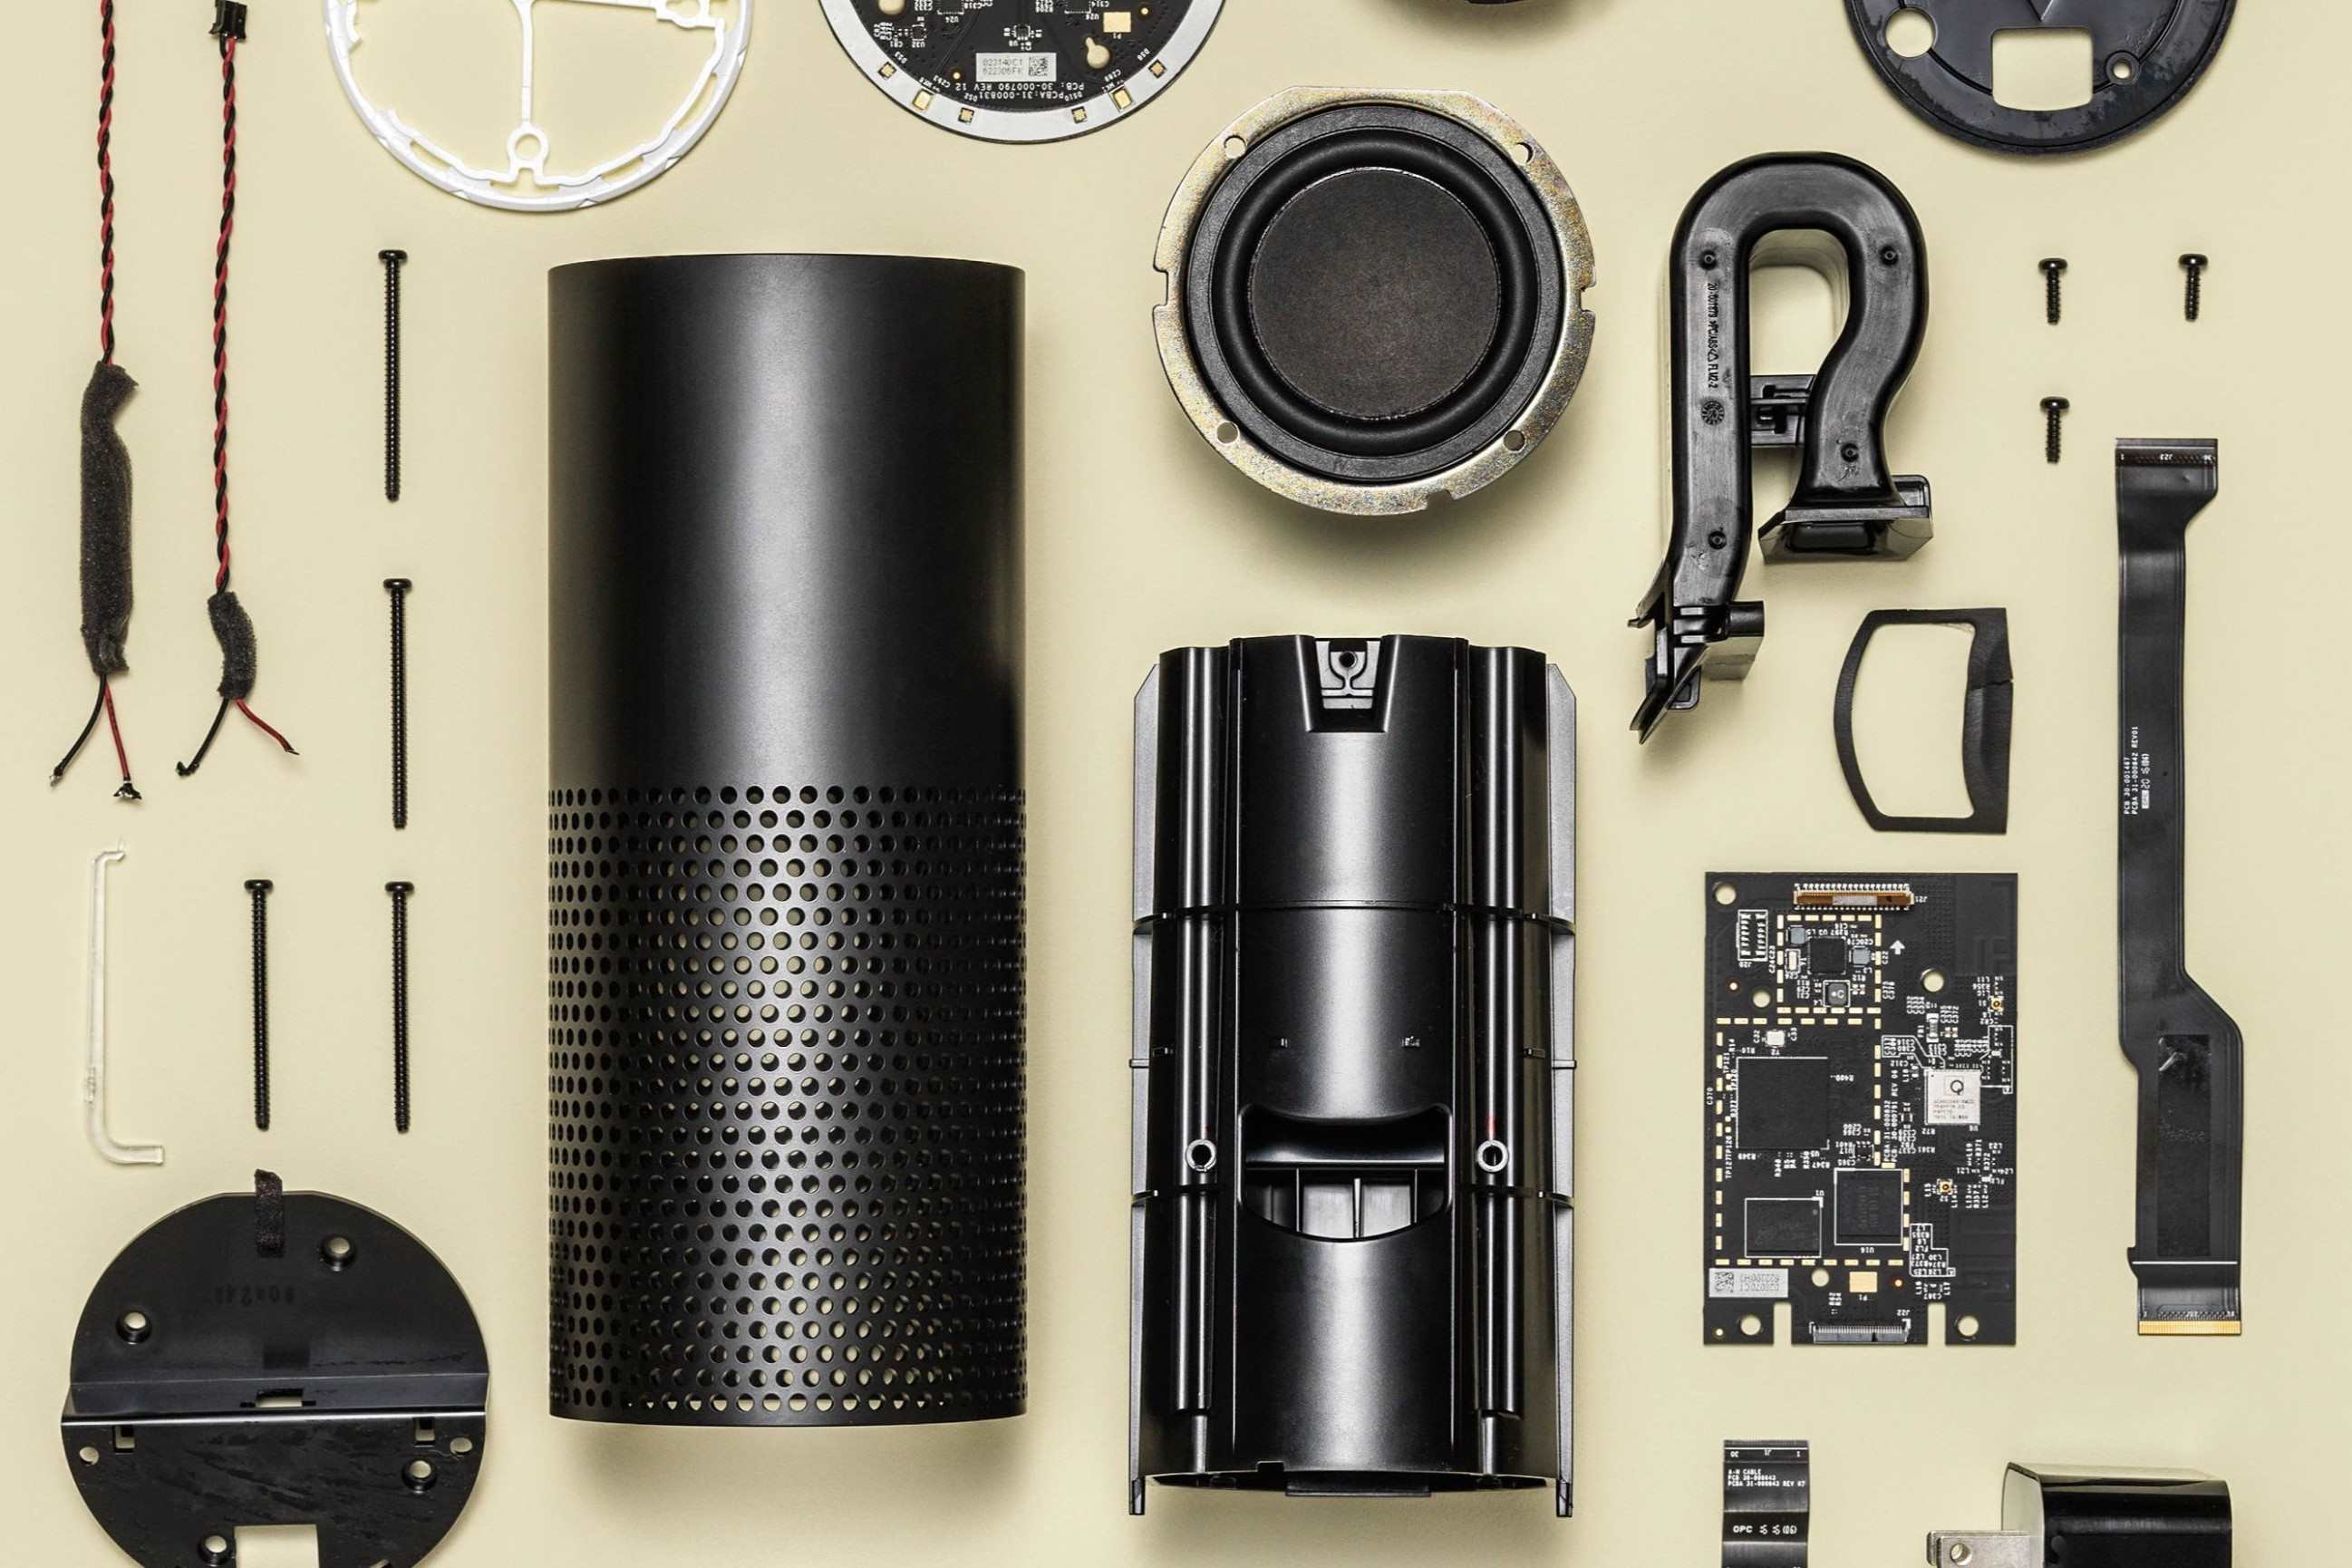 What Is The Amazon Echo Made Out Of?